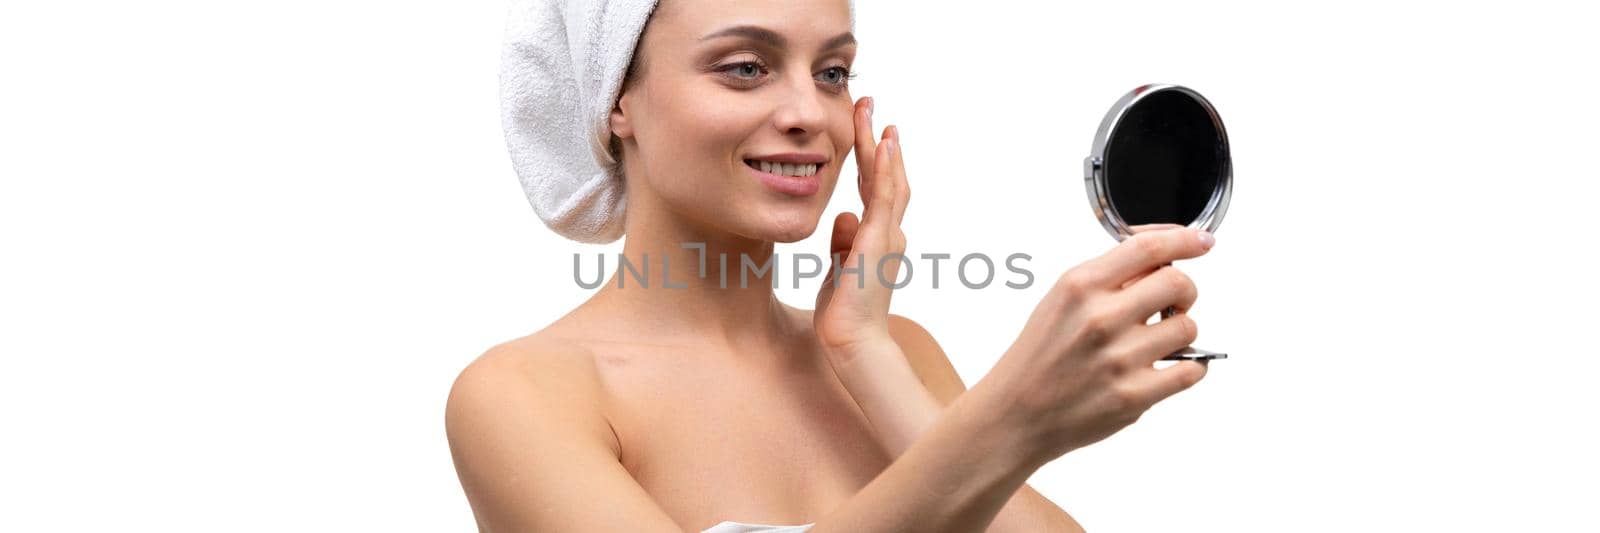 a woman after a shower admires herself in a small mirror on a white background.